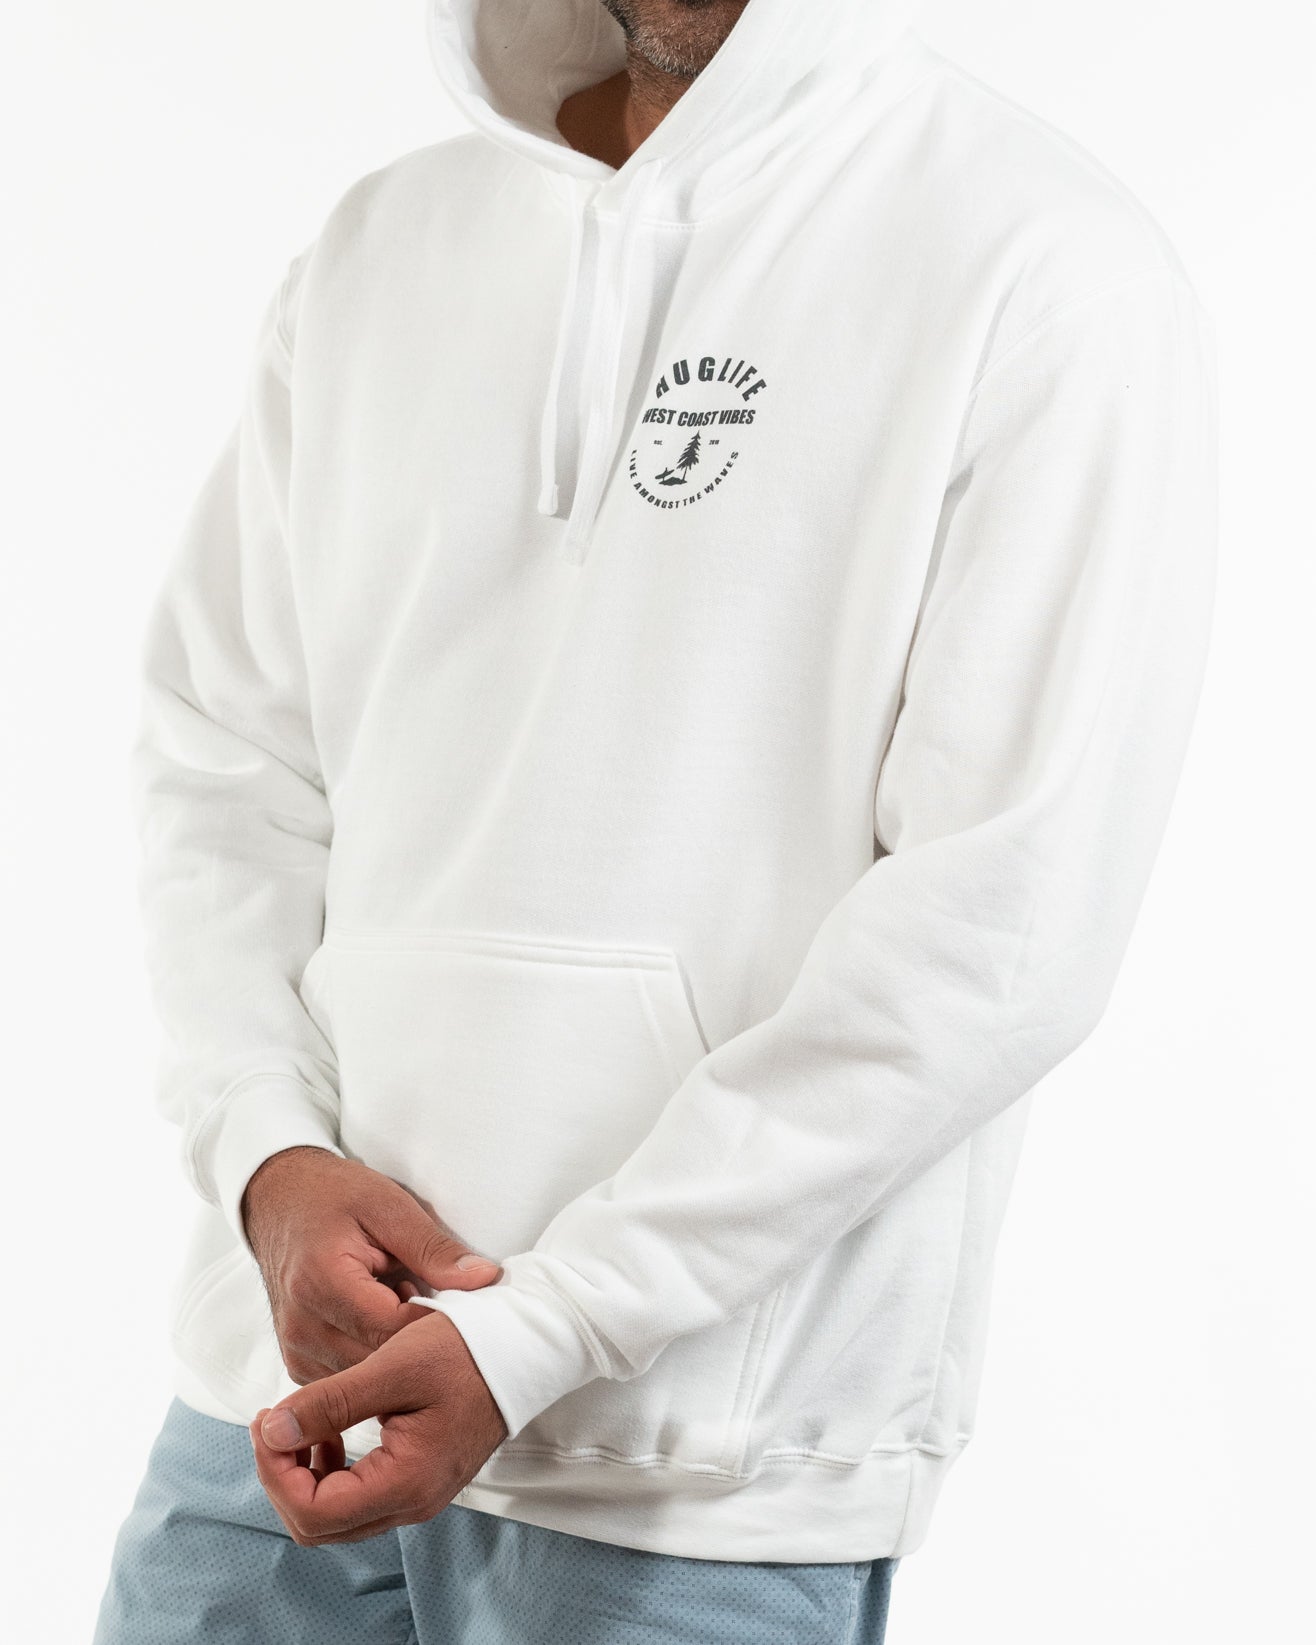 The Chris / Unisex White Hoodie / Charcoal West Coast Vibes